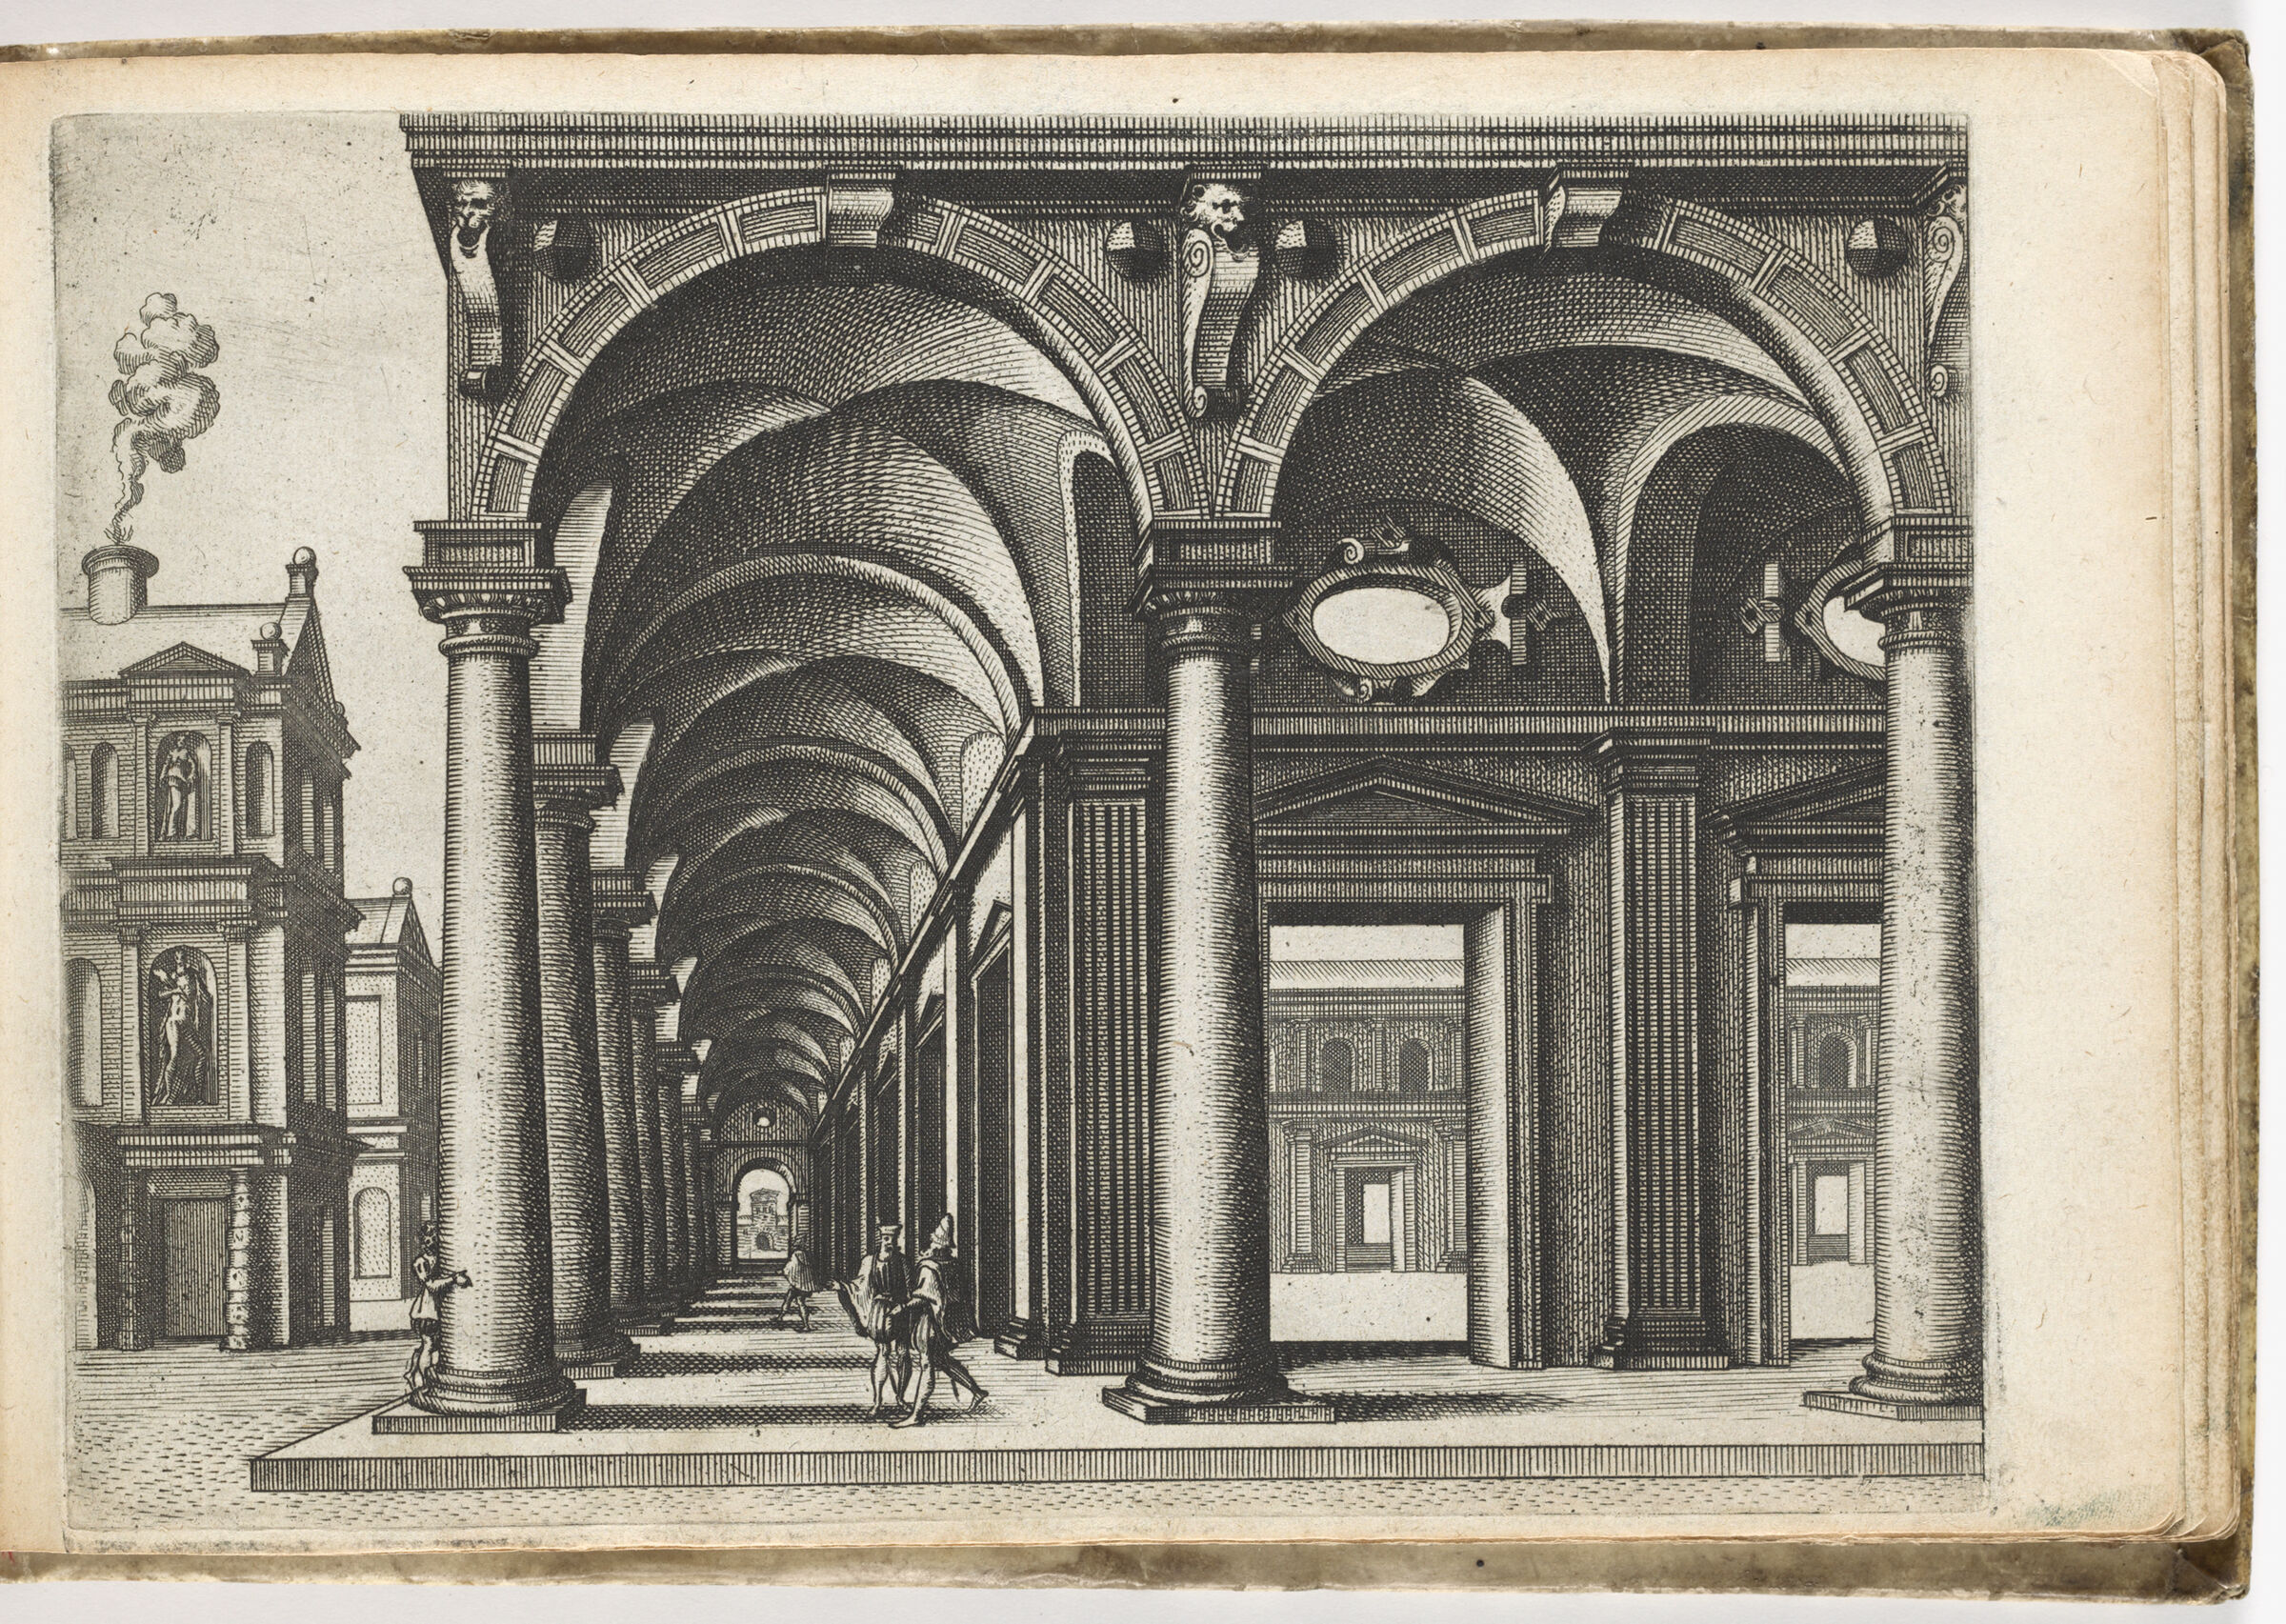 Colonnade With Columns Of The Tuscan Order Surrounding A Courtyard, On The Left A Two Storey Townhouse